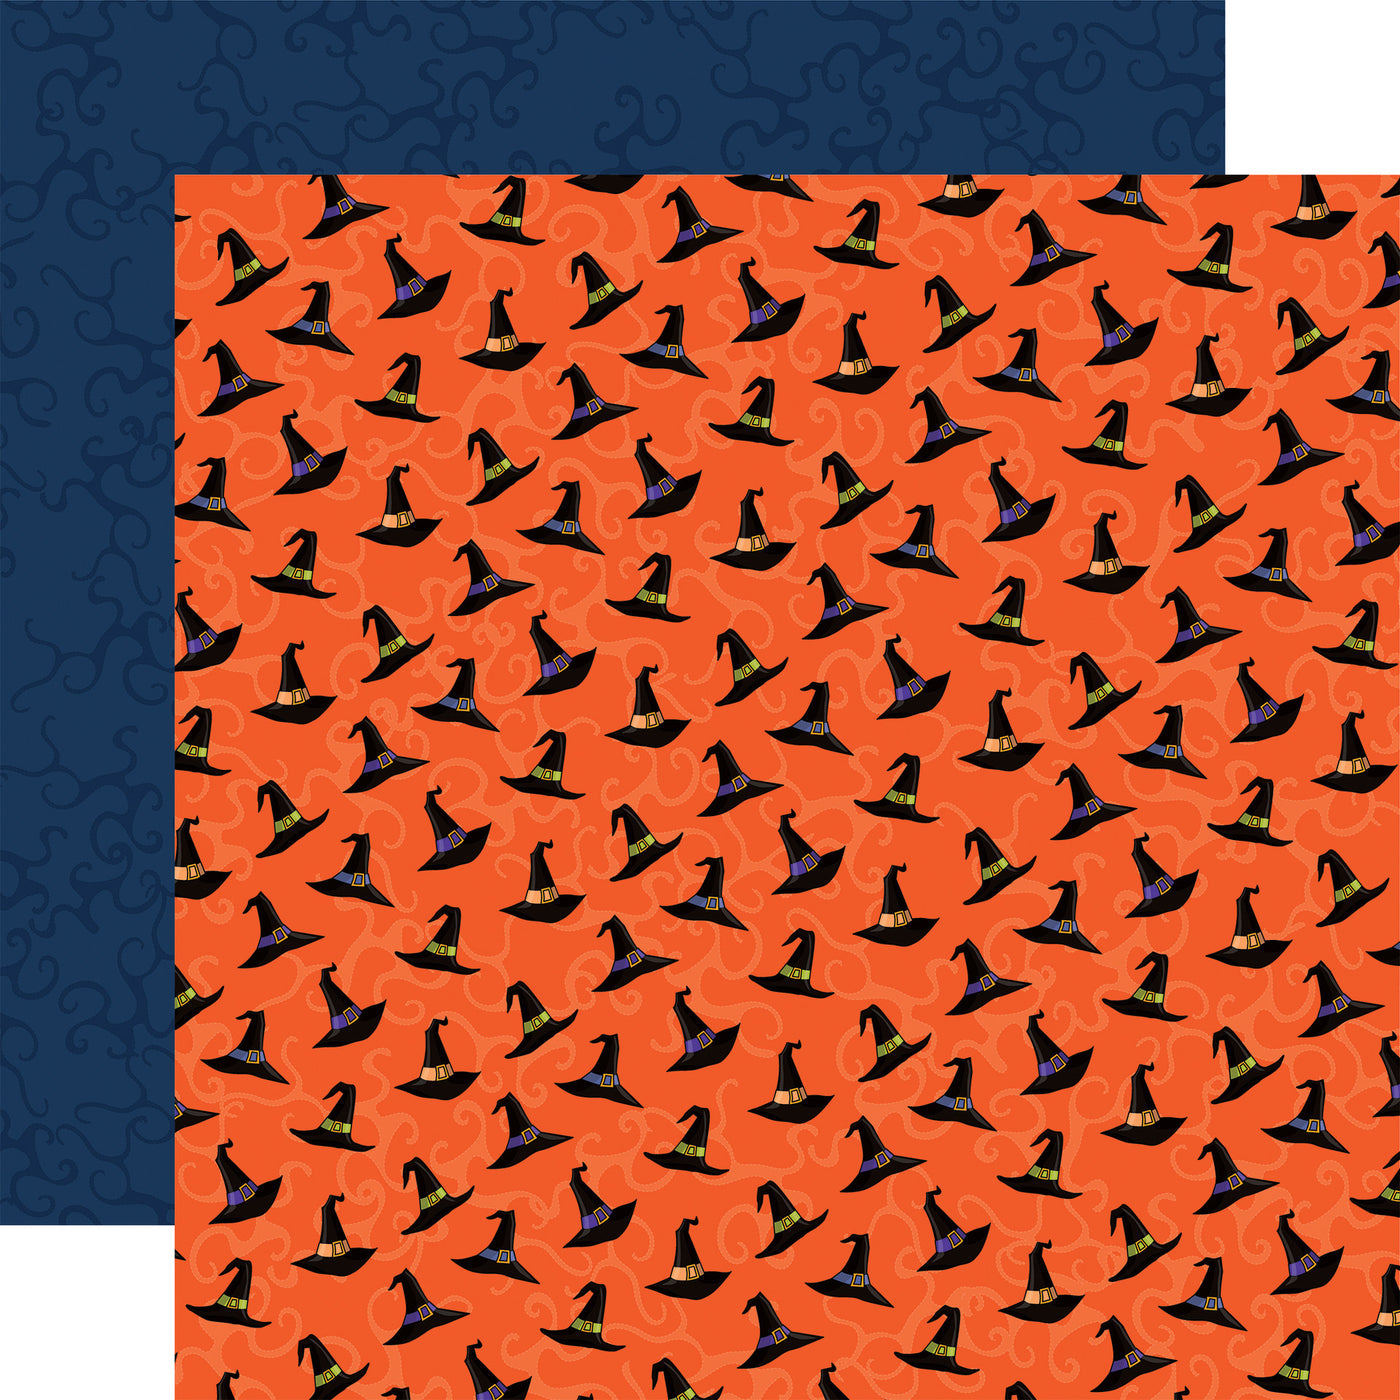 Double-sided 12x12 cardstock. (Side A - is covered with Witch hats on an orange background, and Side B - is a blue abstract pattern on a blue background) Acid free